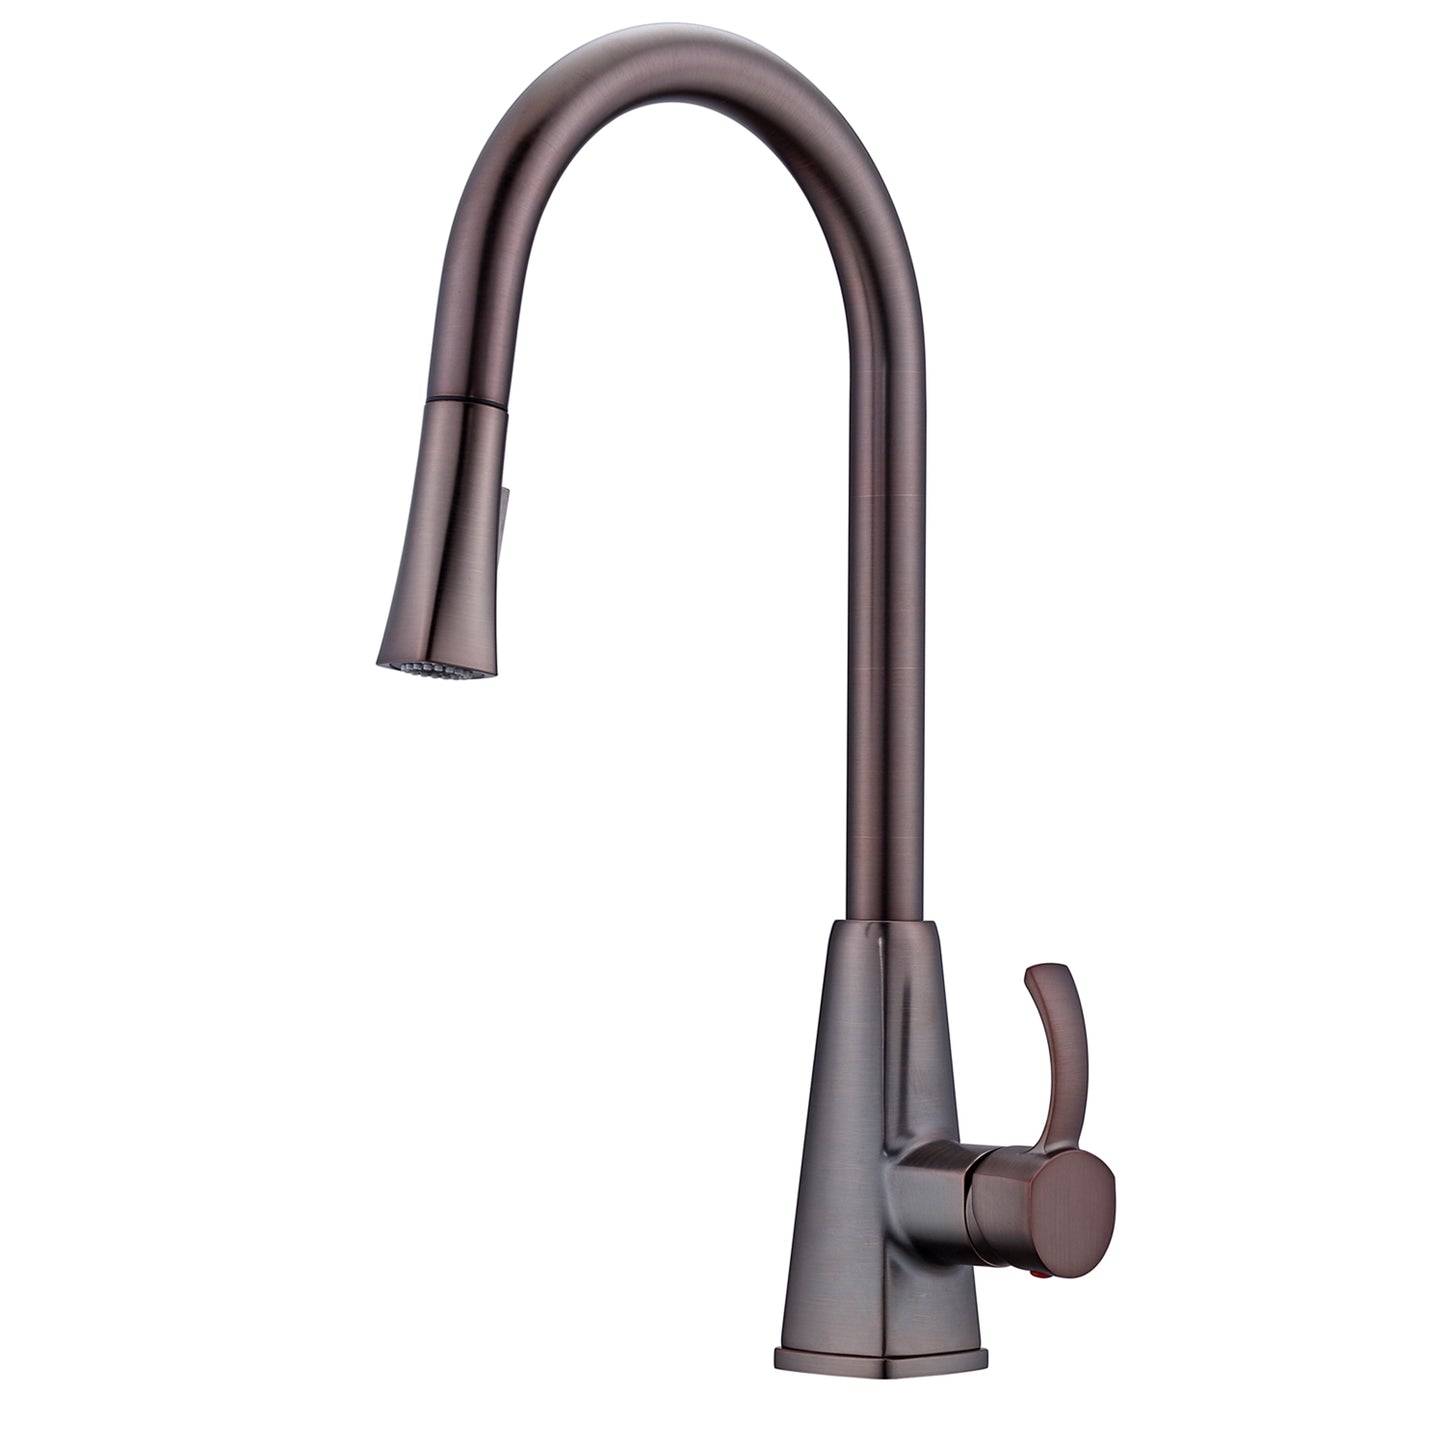 Christabel Pull-down Kitchen Faucet with Hose, Oil Rubbed Bronze